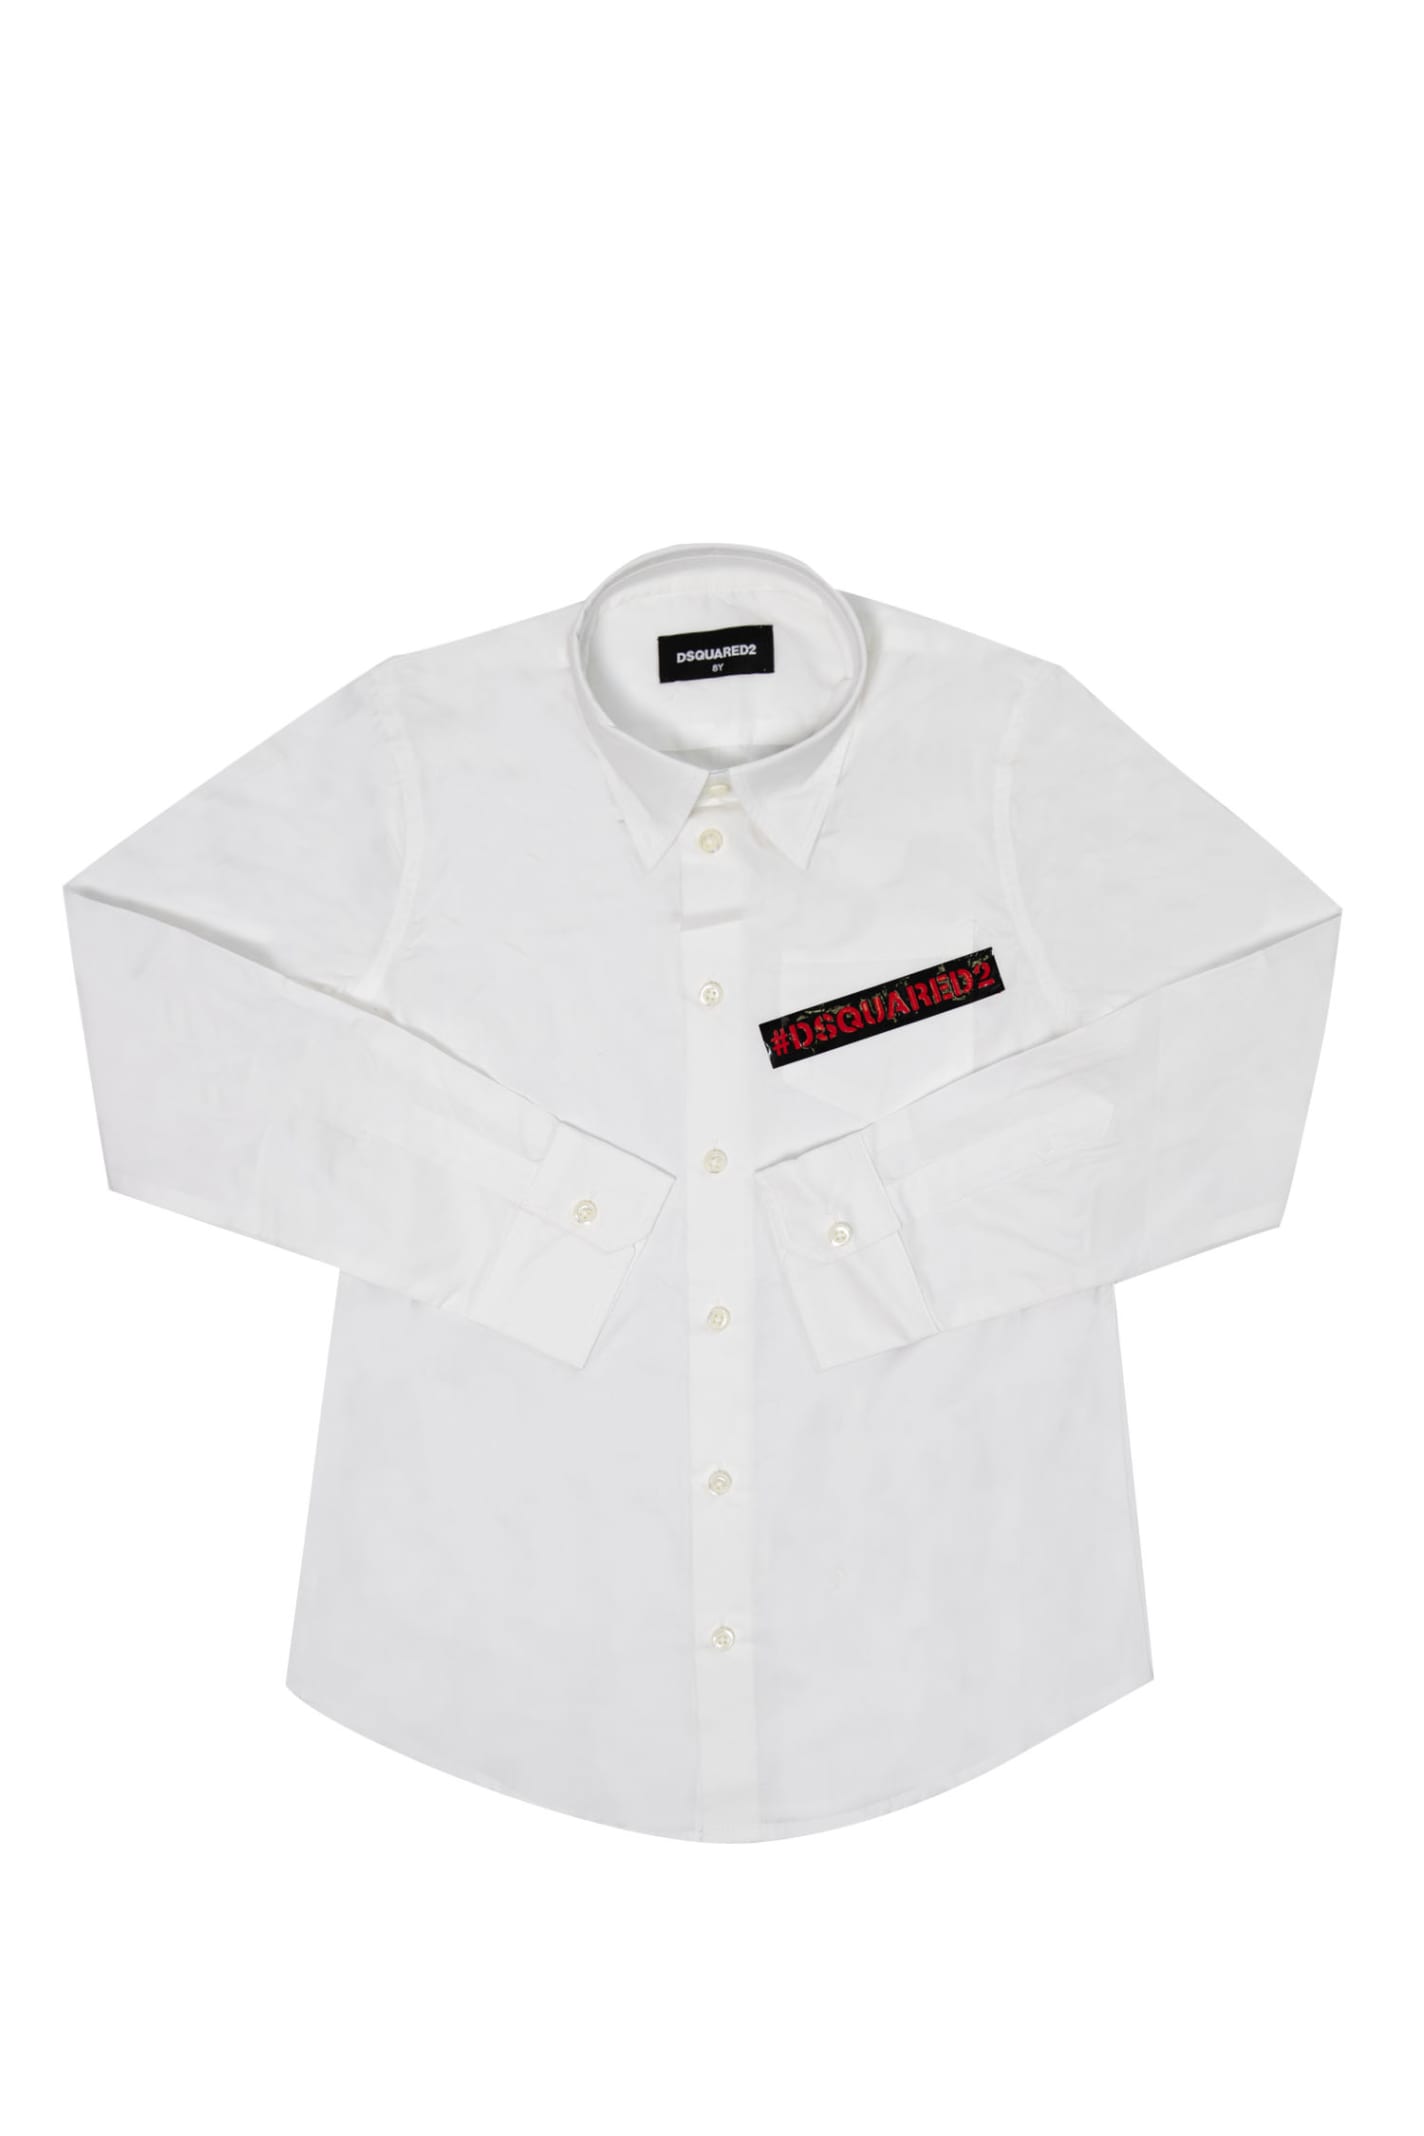 Dsquared2 Kids' Cotton Shirt In White